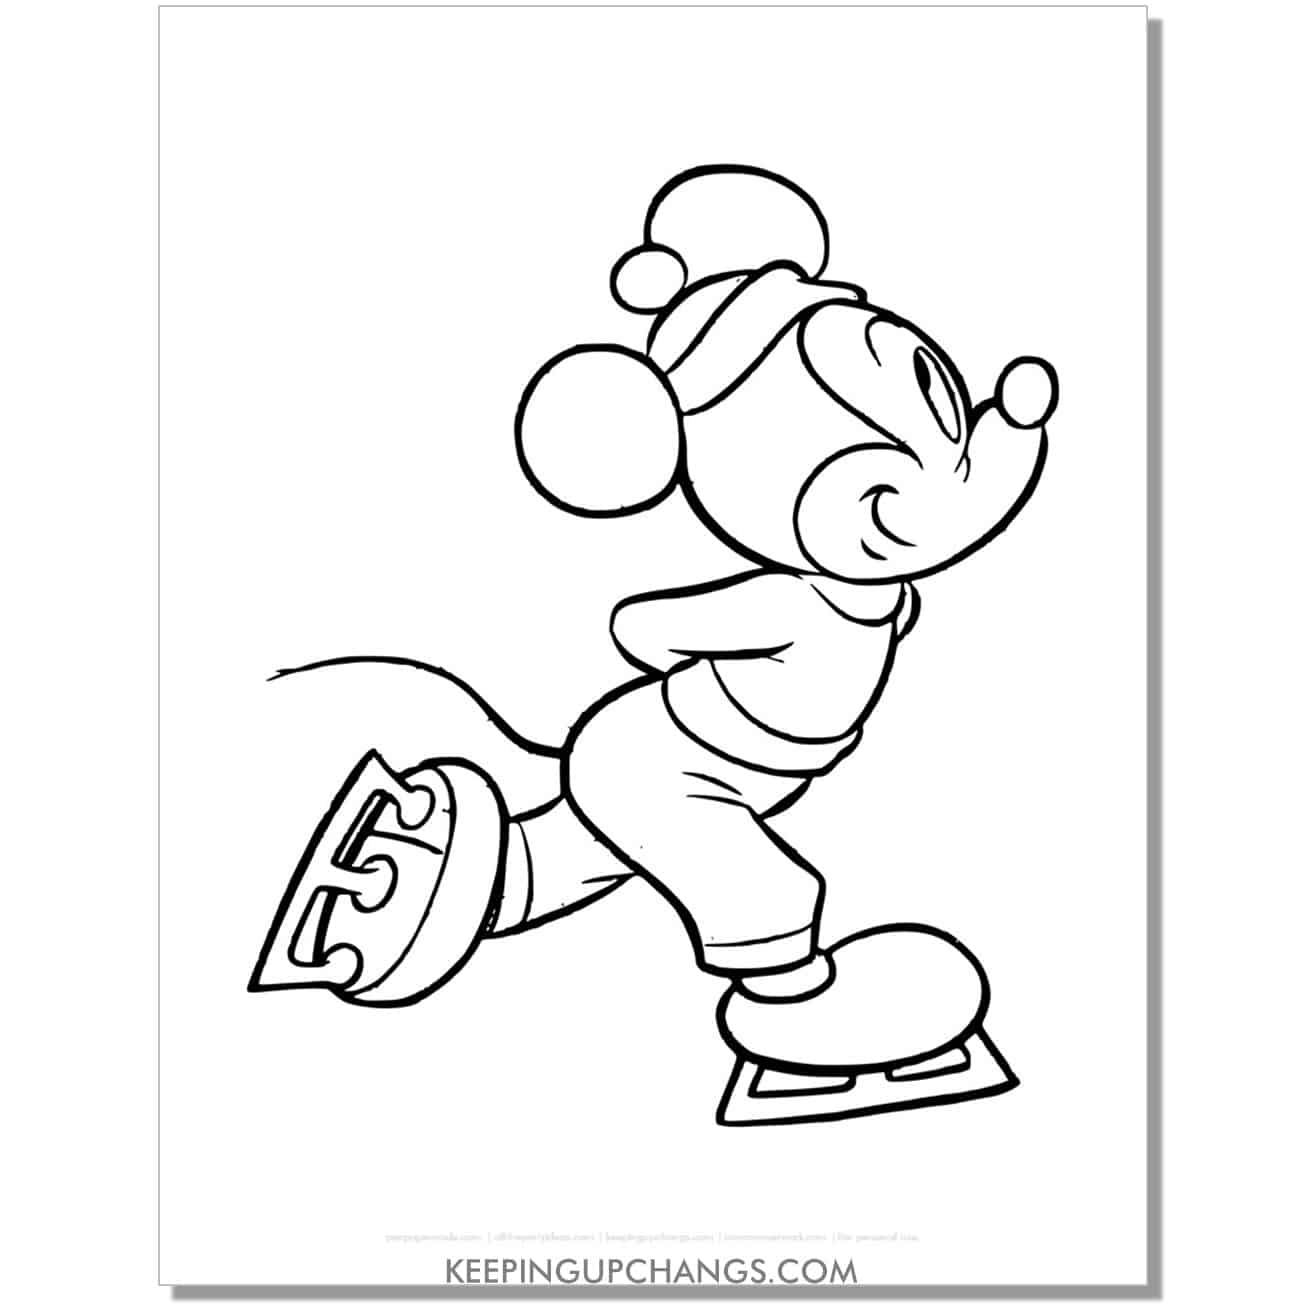 free mickey mouse ice skaing coloring page, sheet.